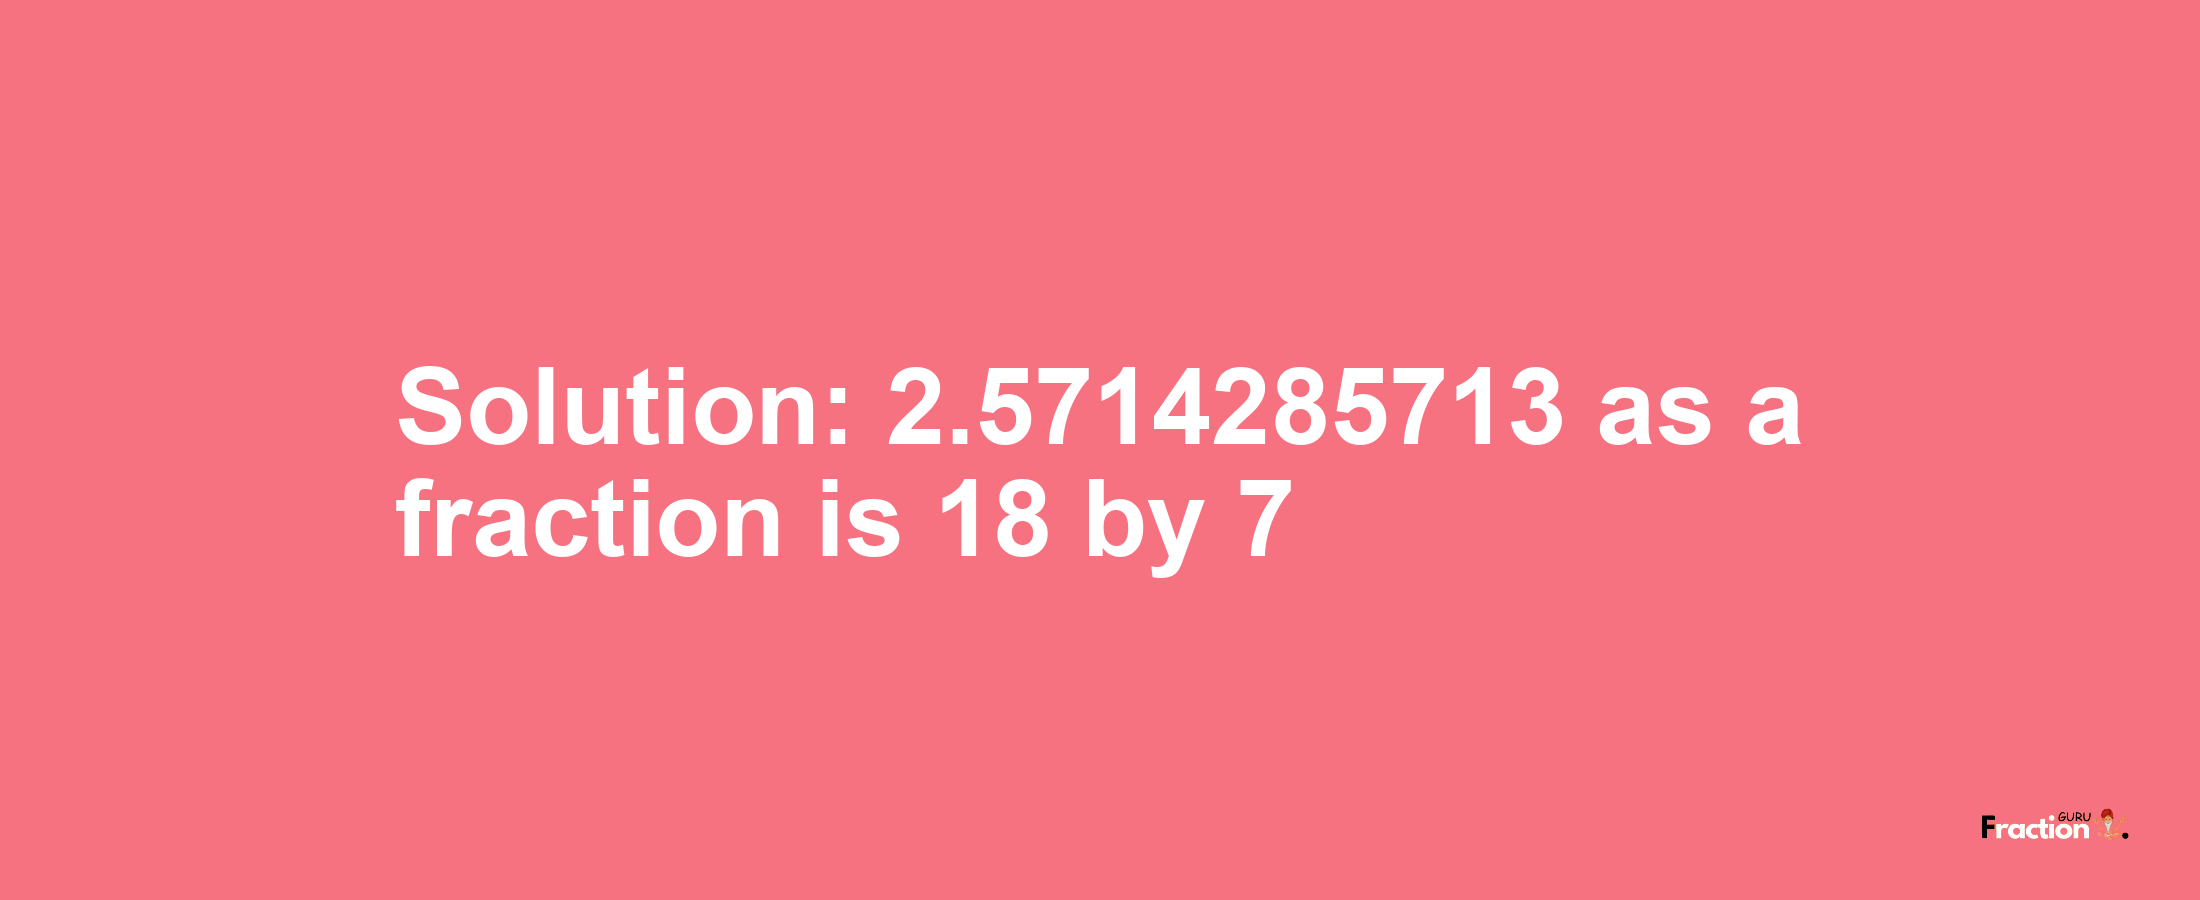 Solution:2.5714285713 as a fraction is 18/7